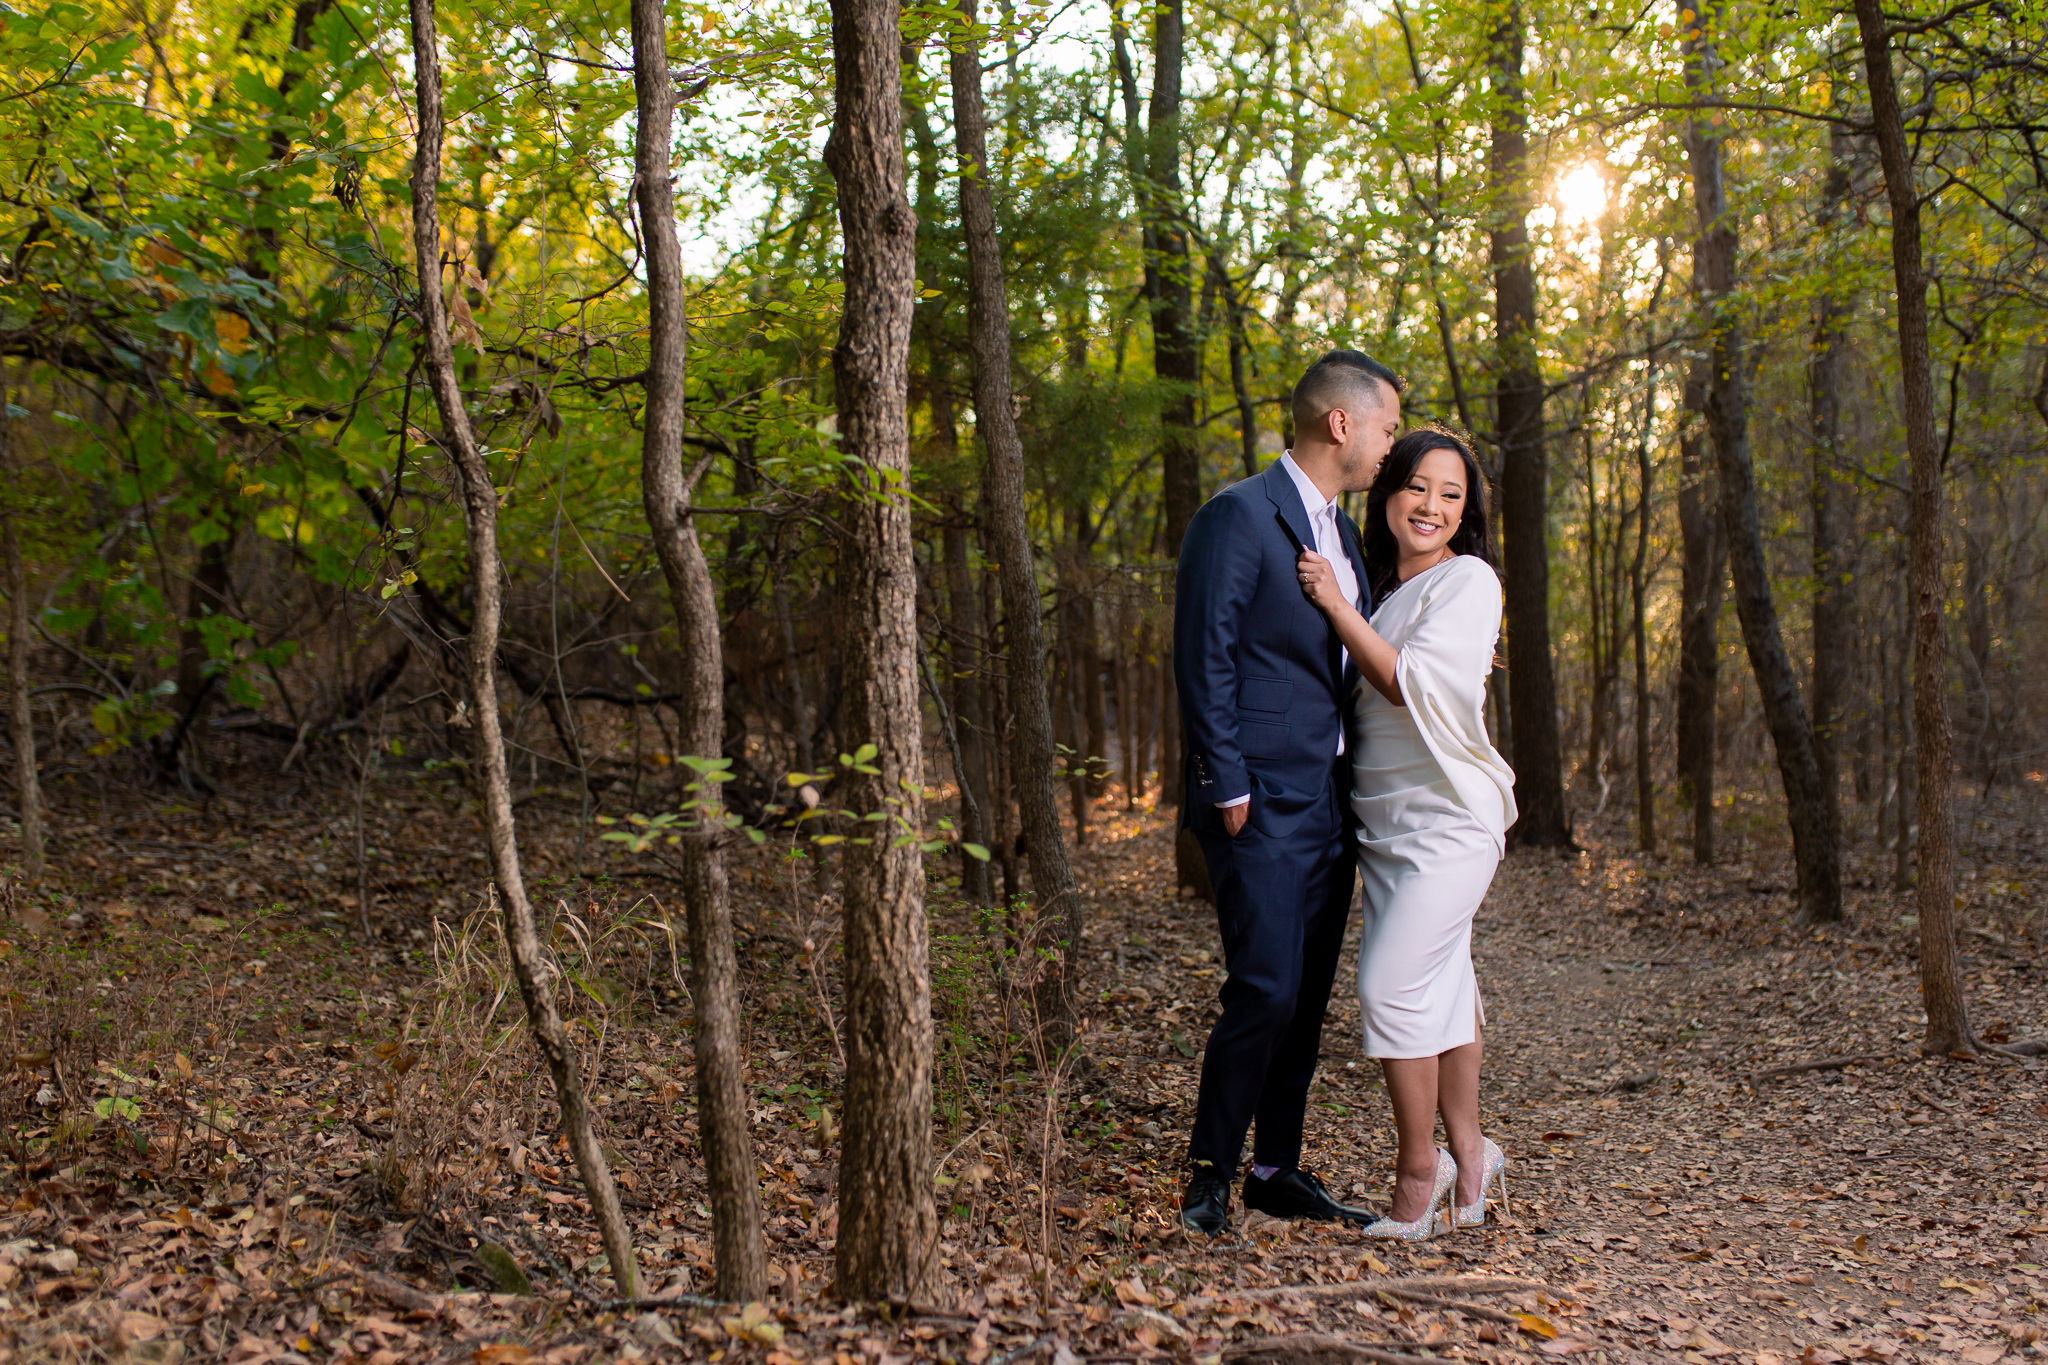 Groom kissing bride in wooded forest in dallas texas